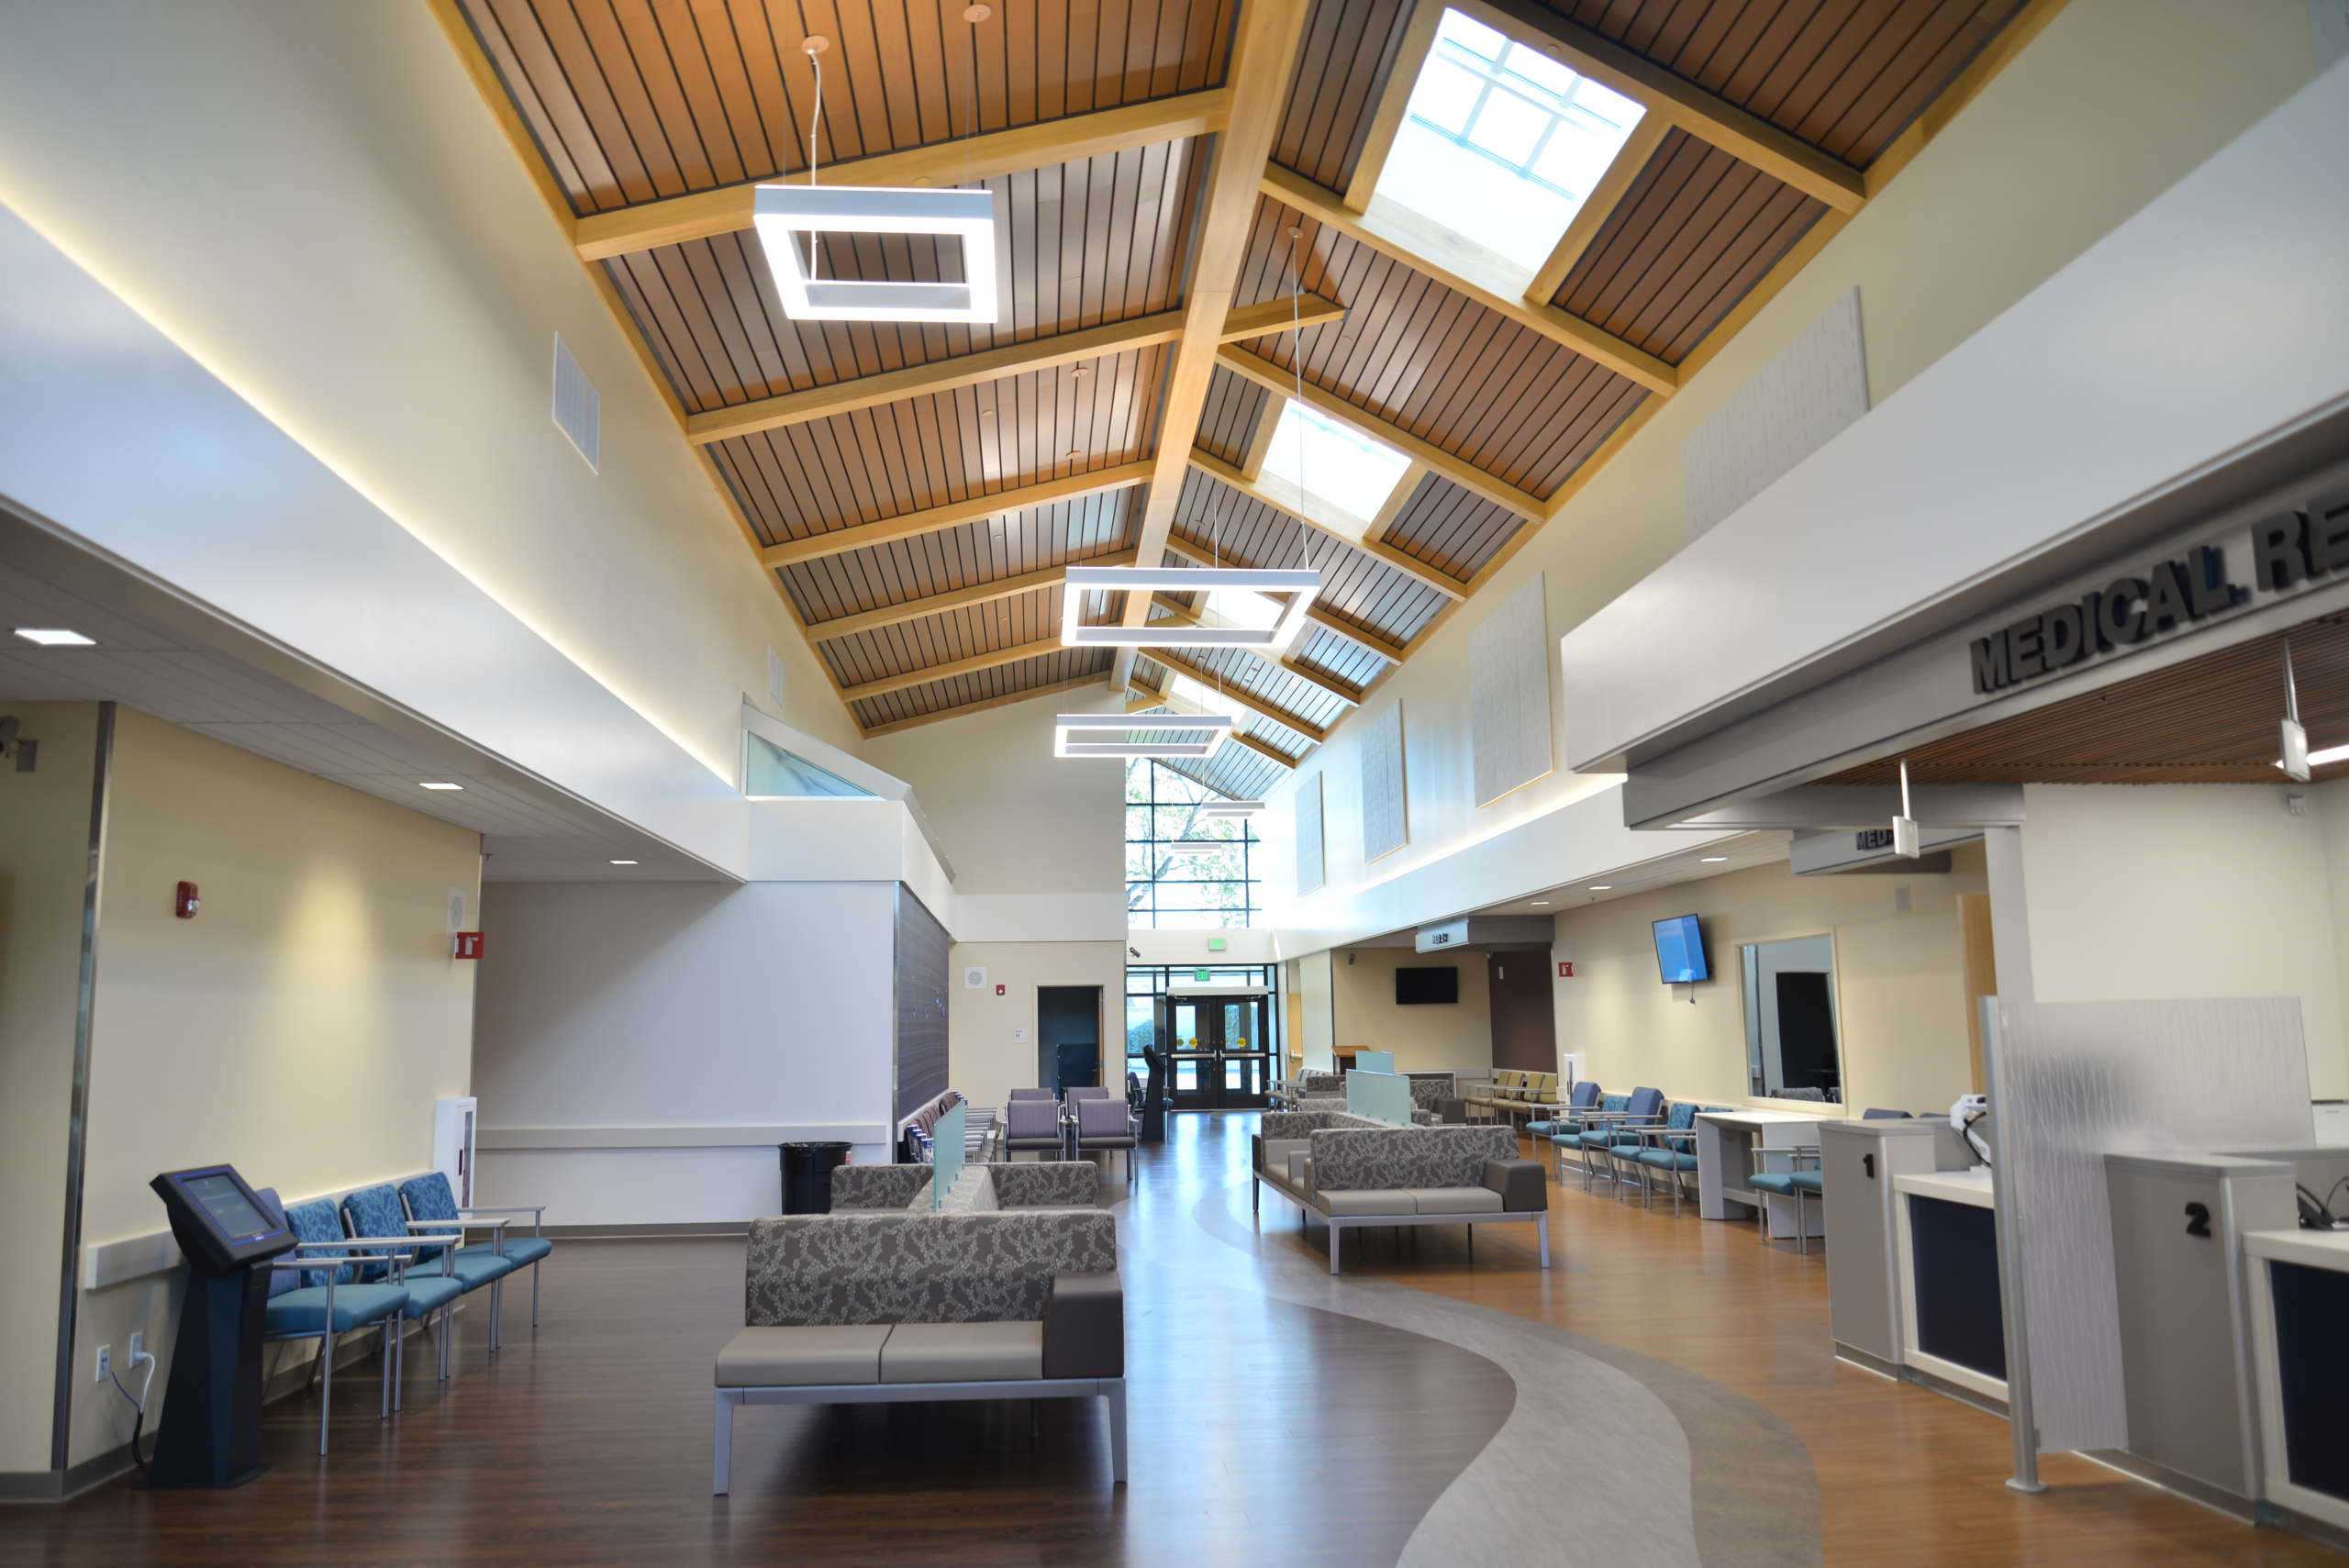 Lobby and waiting area of the Anderson Family Health & Dental Center at the Shasta Community Health Center